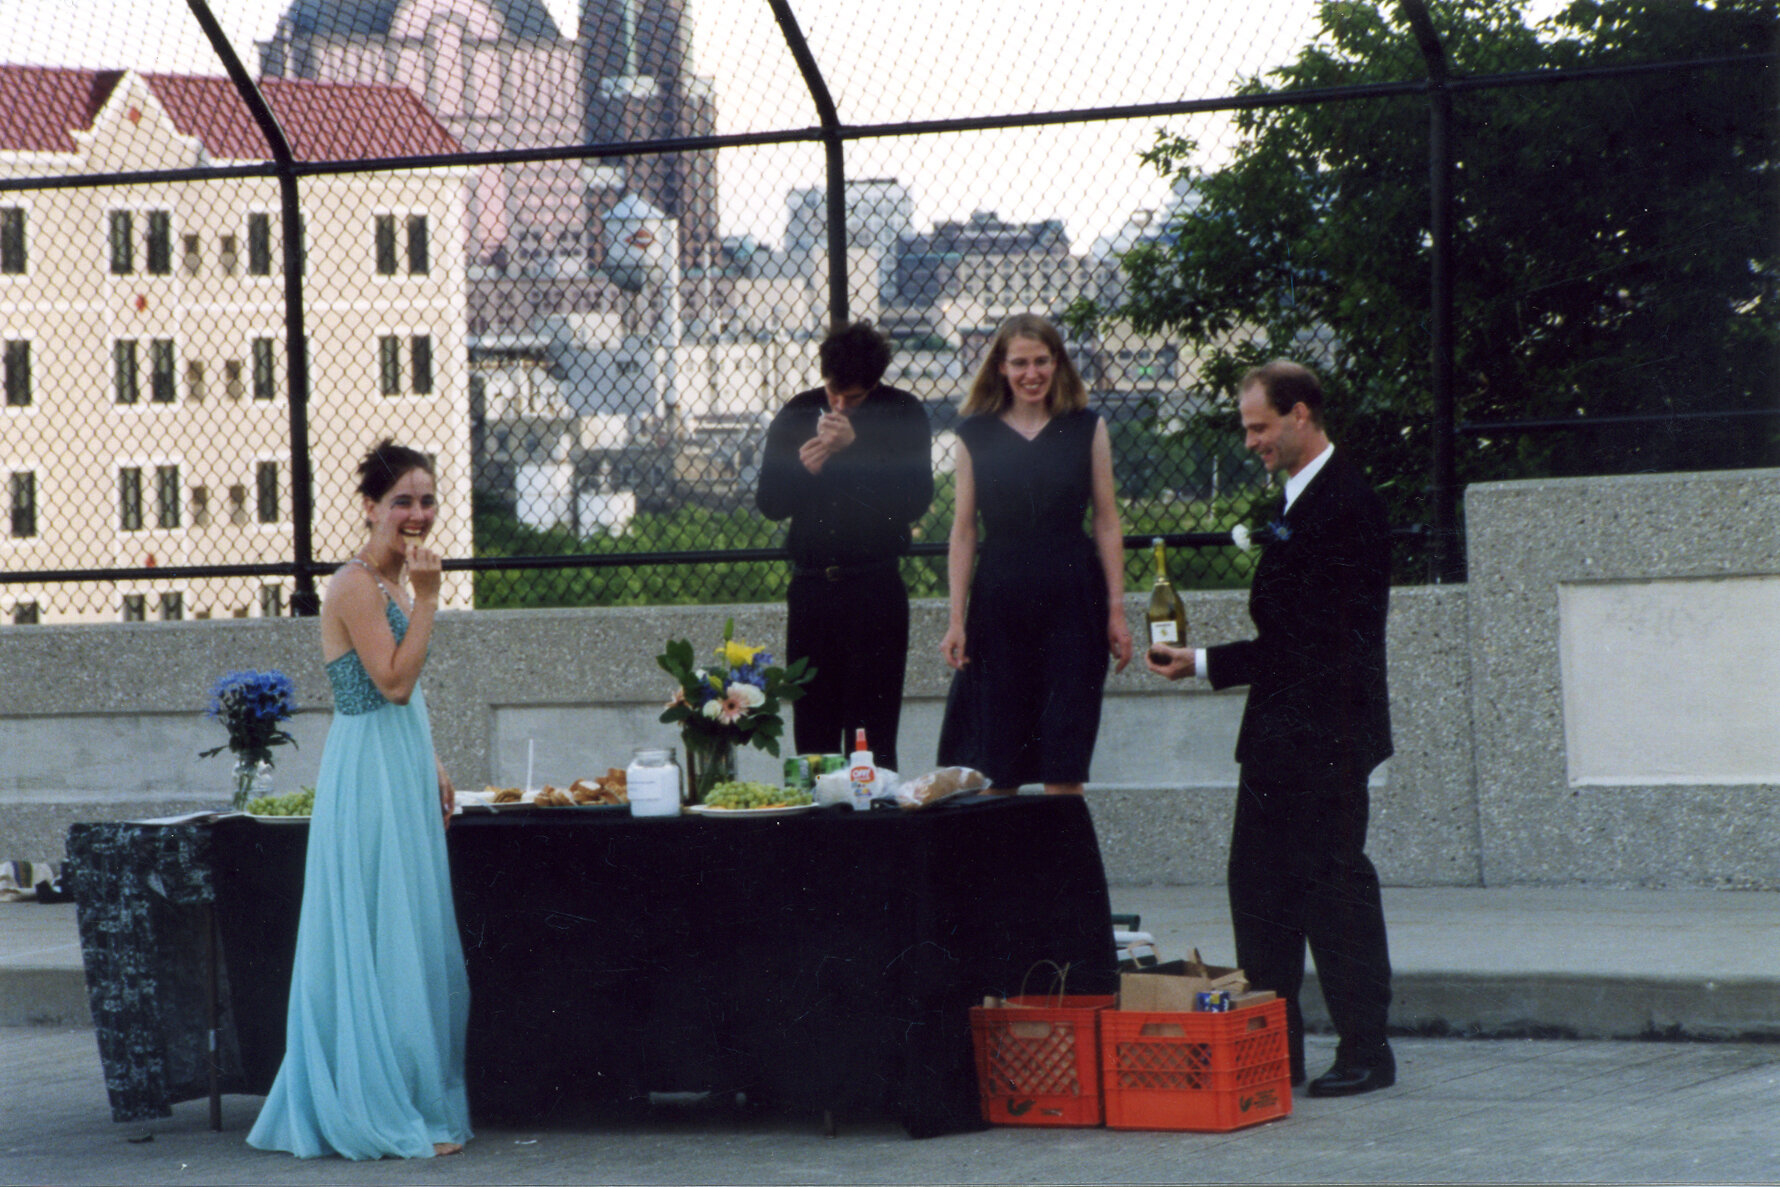 Woman in long blue dress stands next to table, behind it are 2 men and a woman all in black and tall black chain link fence.